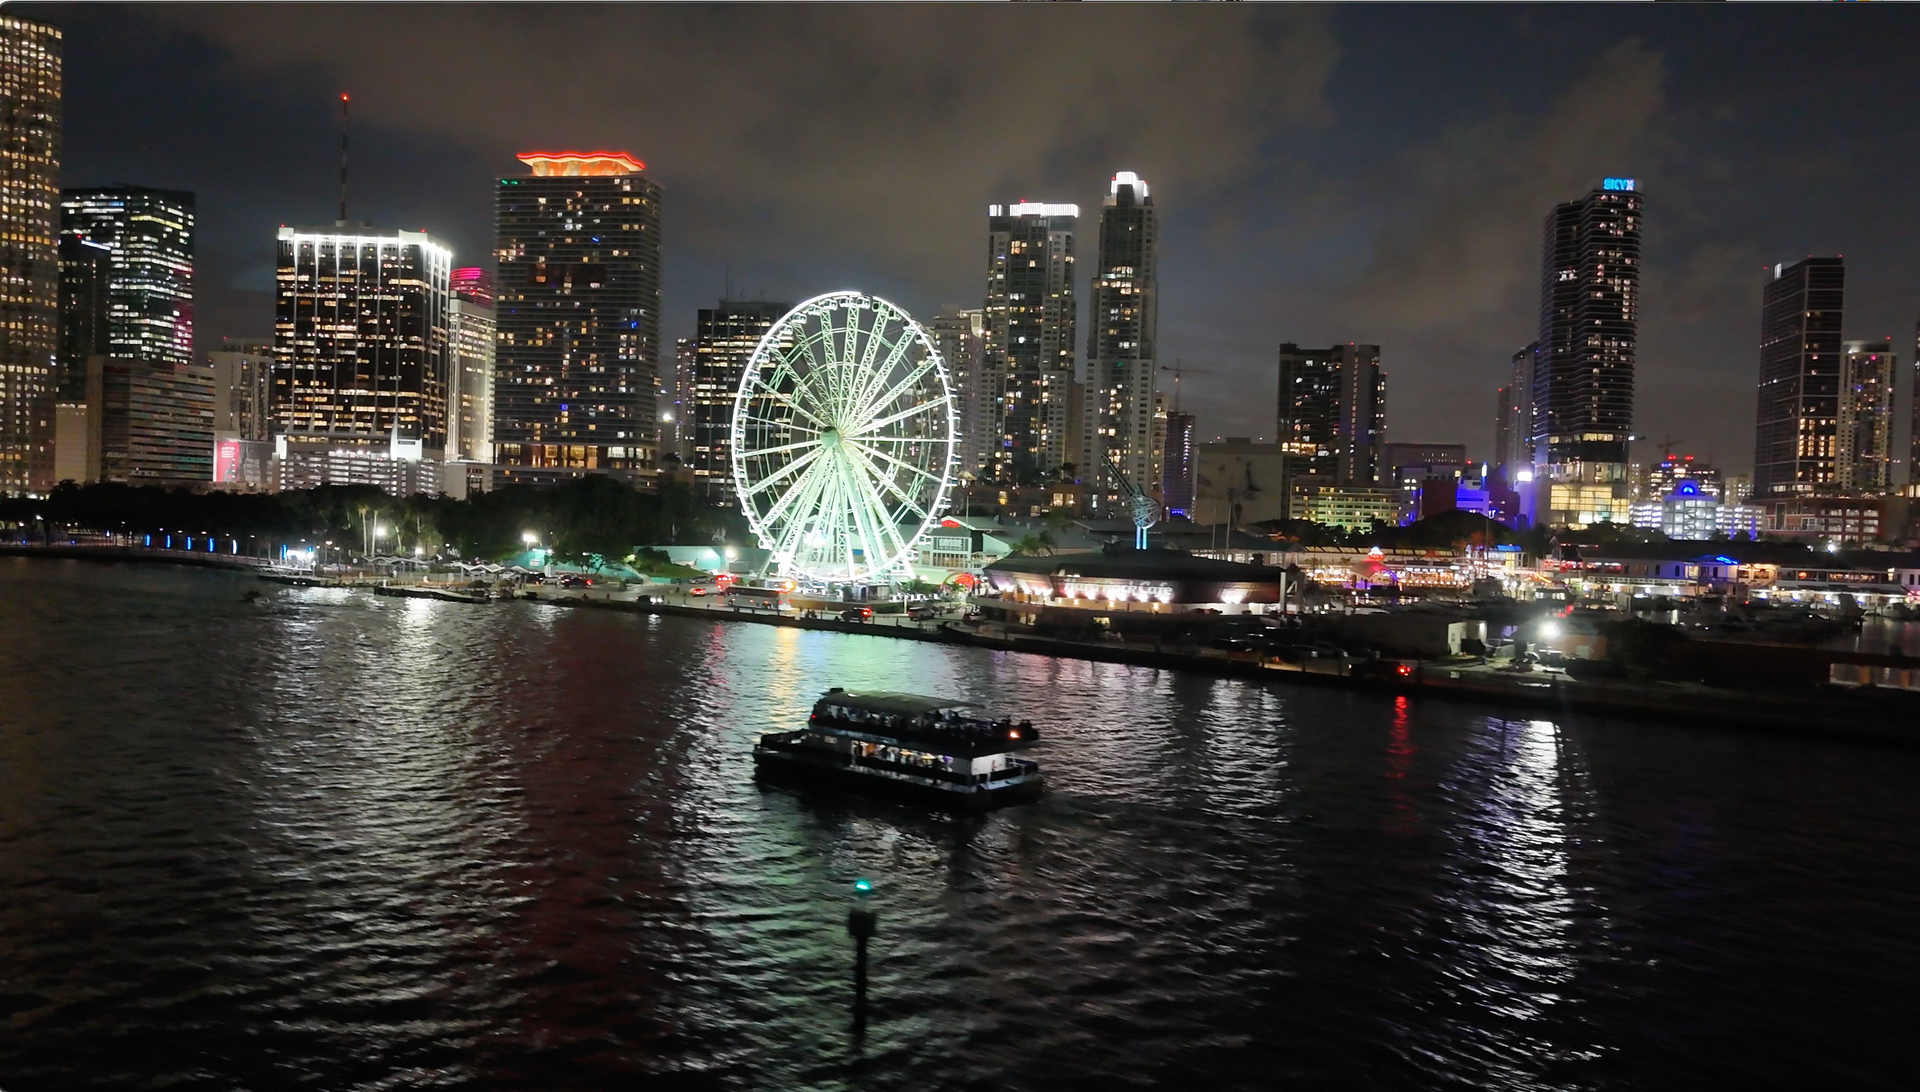 The Miami Evening Cruise and the Miami Night Cruise just give you best relaxing boat tour in Miami at Night. With a professional Tour guide giving you fun facts, makes this tour even more special, just look at the wheel how beautiful, built in 2018. 